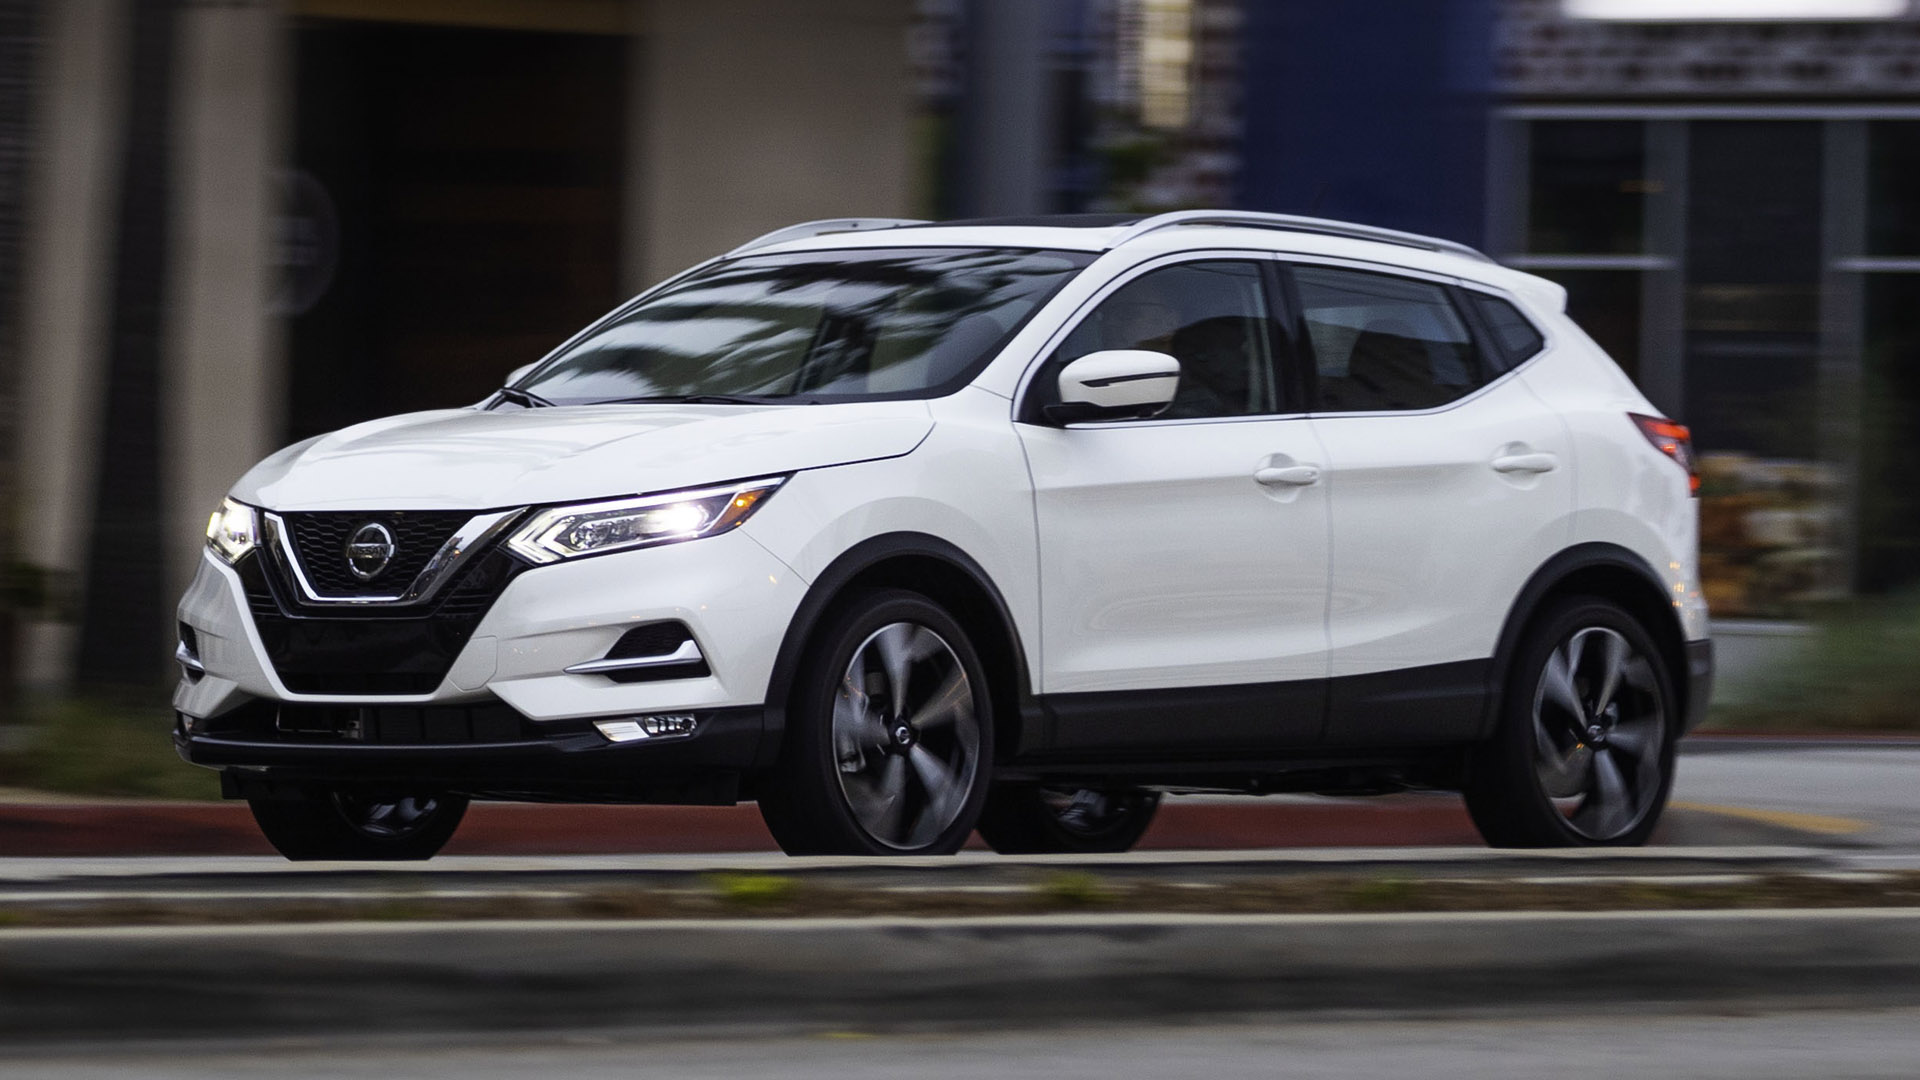 809,000 Nissan Rogue SUVs Recalled for Bad Keys That Could Turn Off Car ...